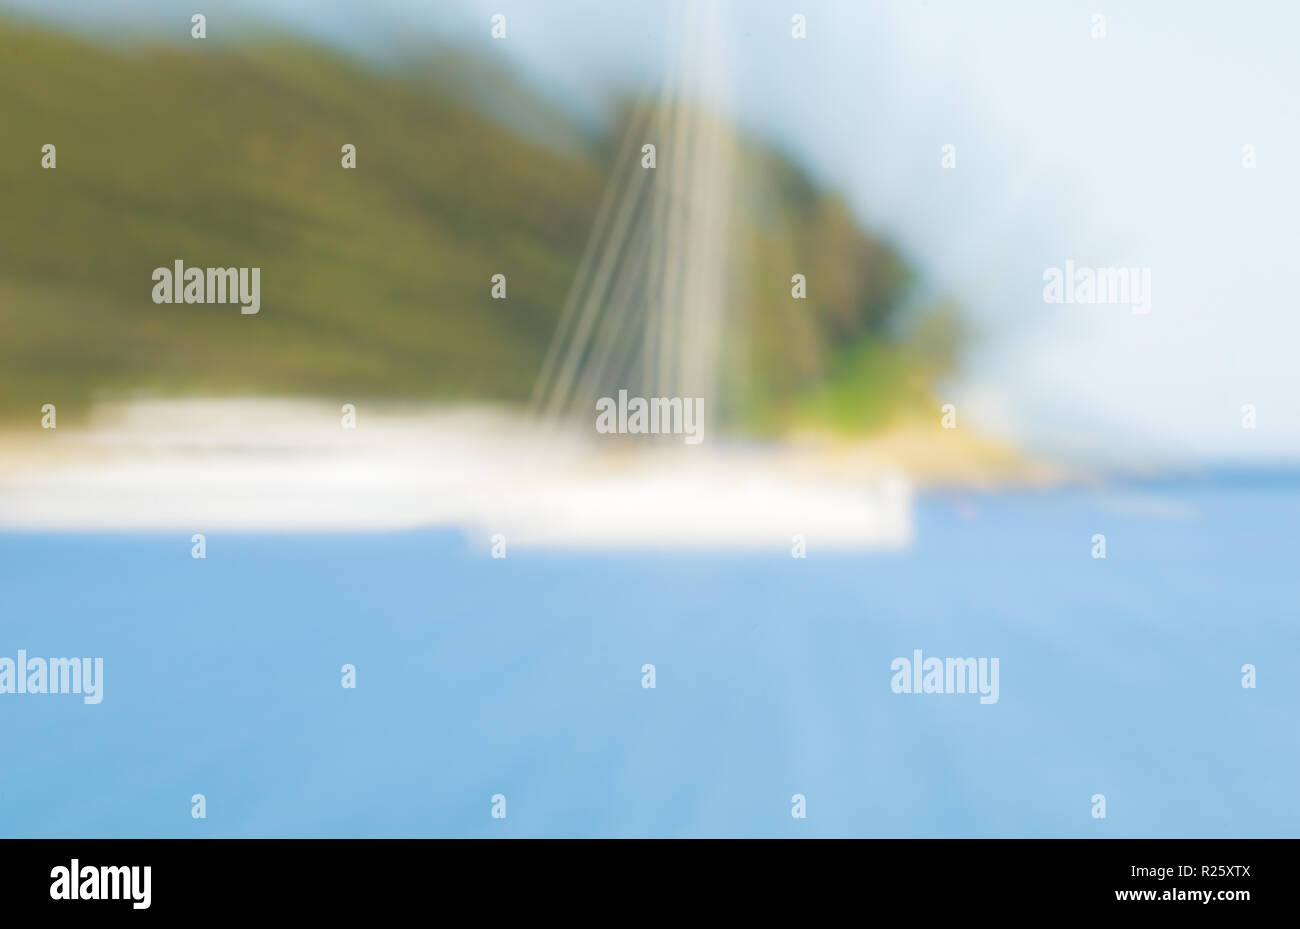 Background image abstract zoom blur at beach with hint of morred yacht Stock Photo